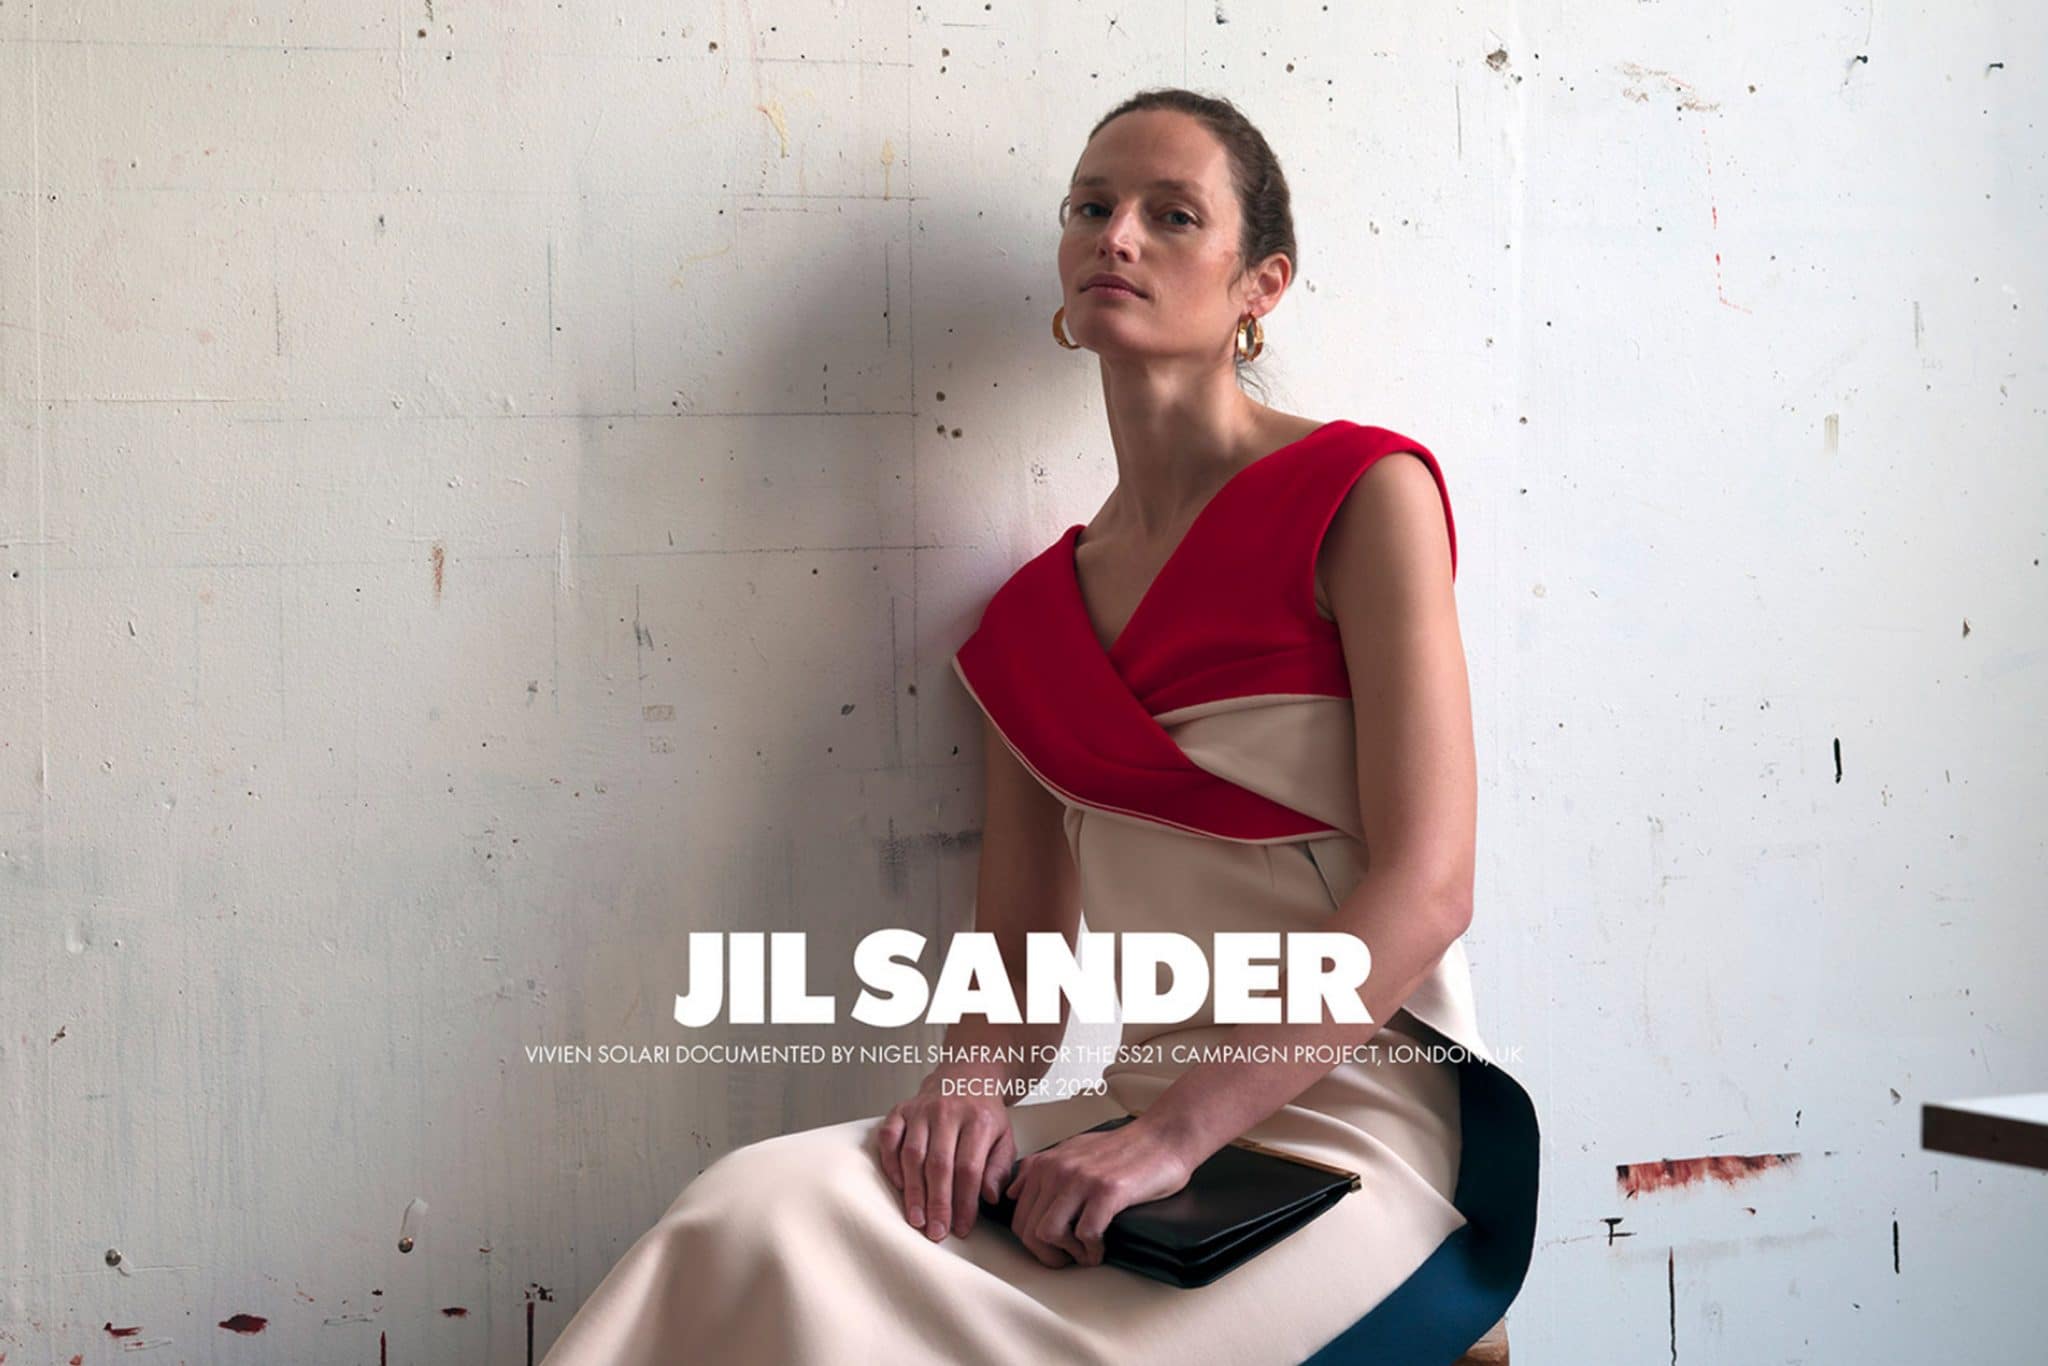 A look into the dreamy new Jil Sander SS21 campaign